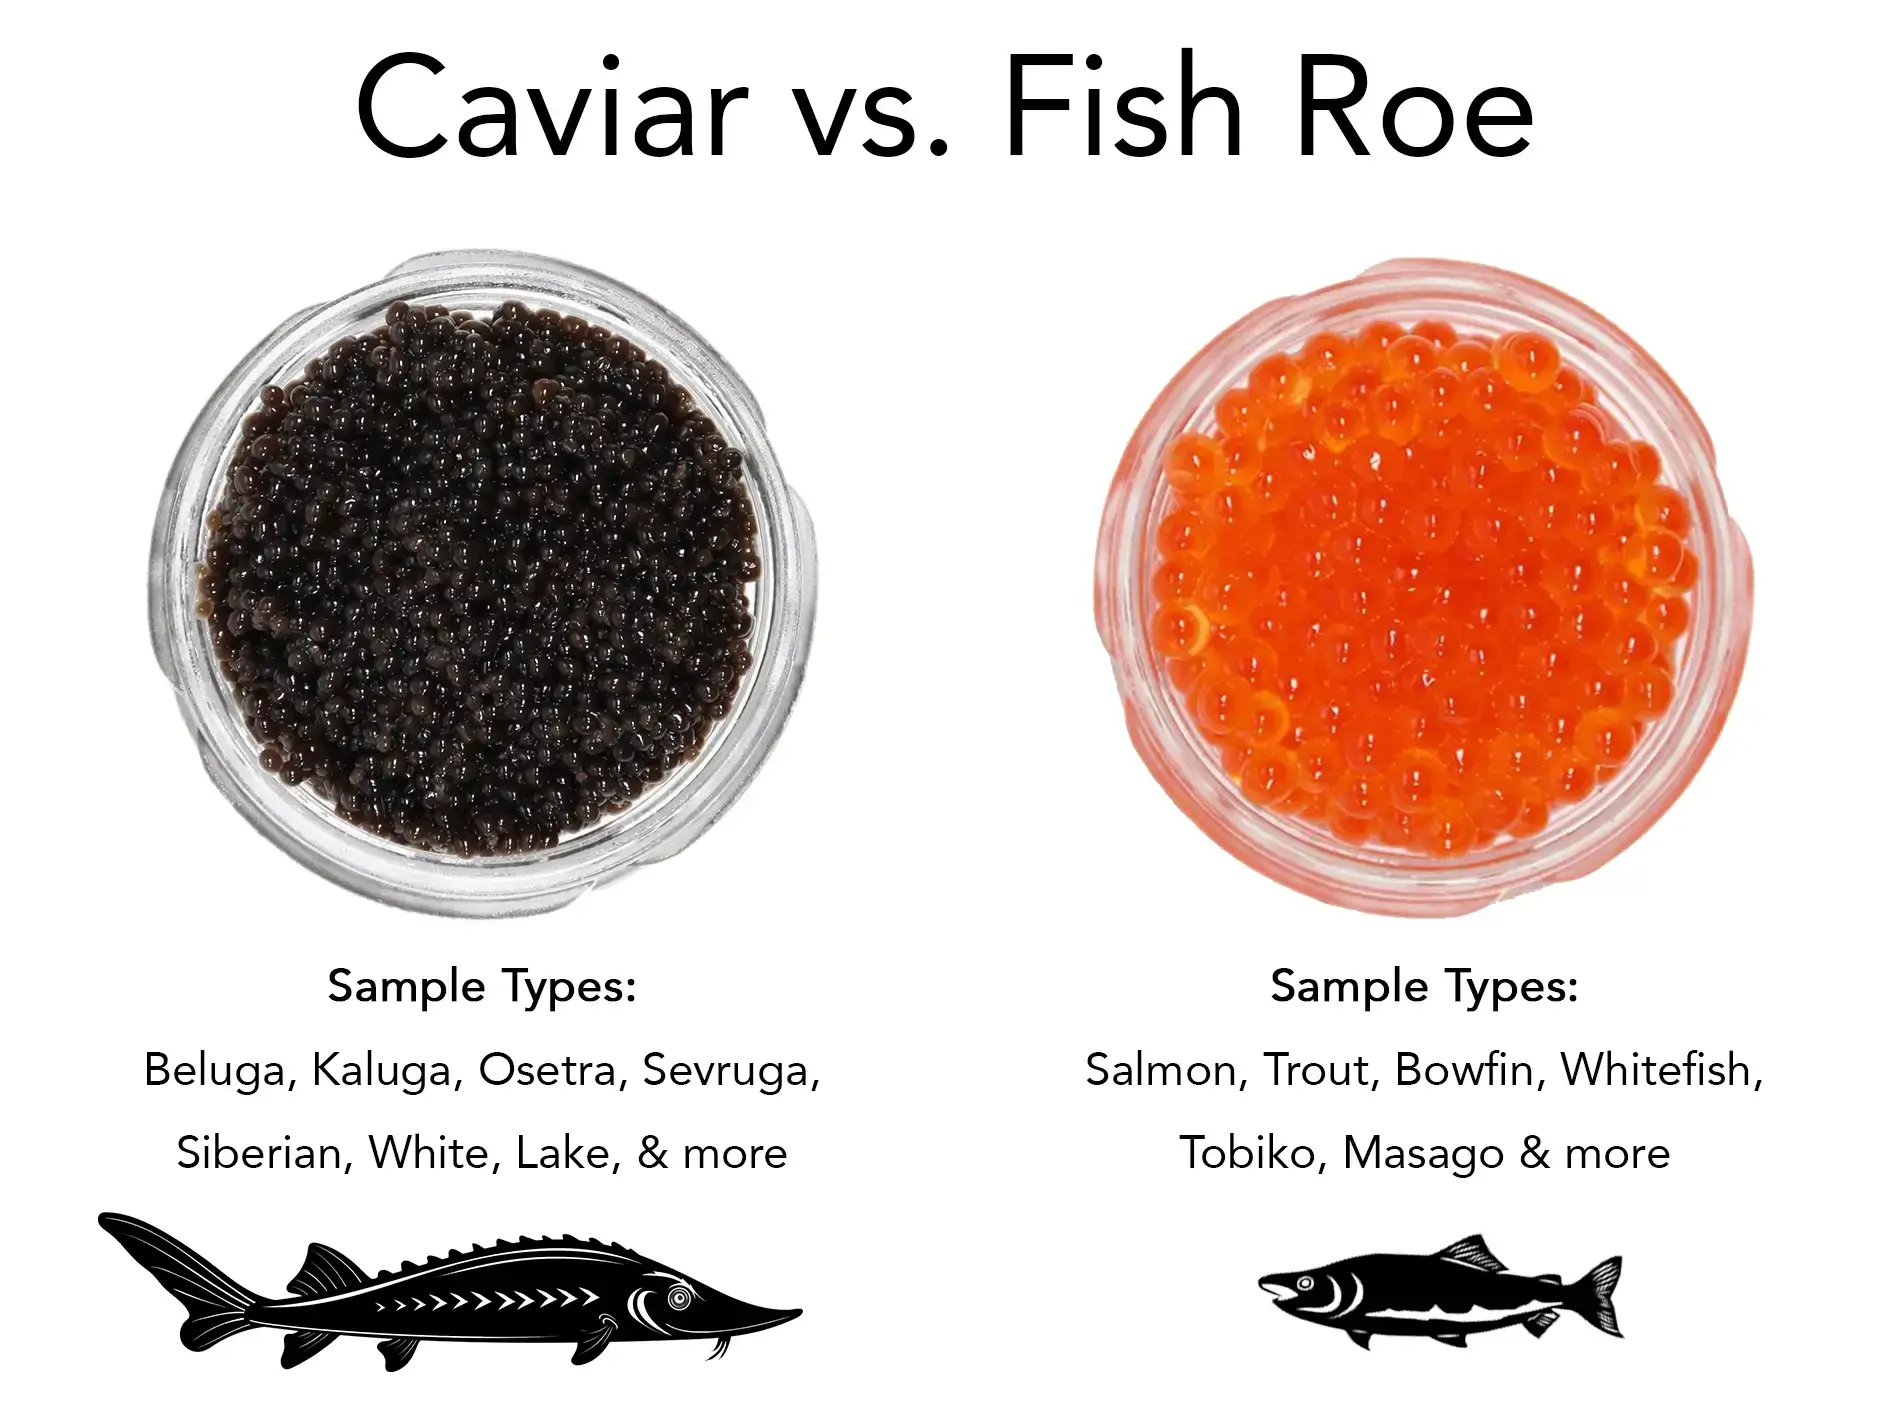 Roe vs. Caviar – What’s the Difference?